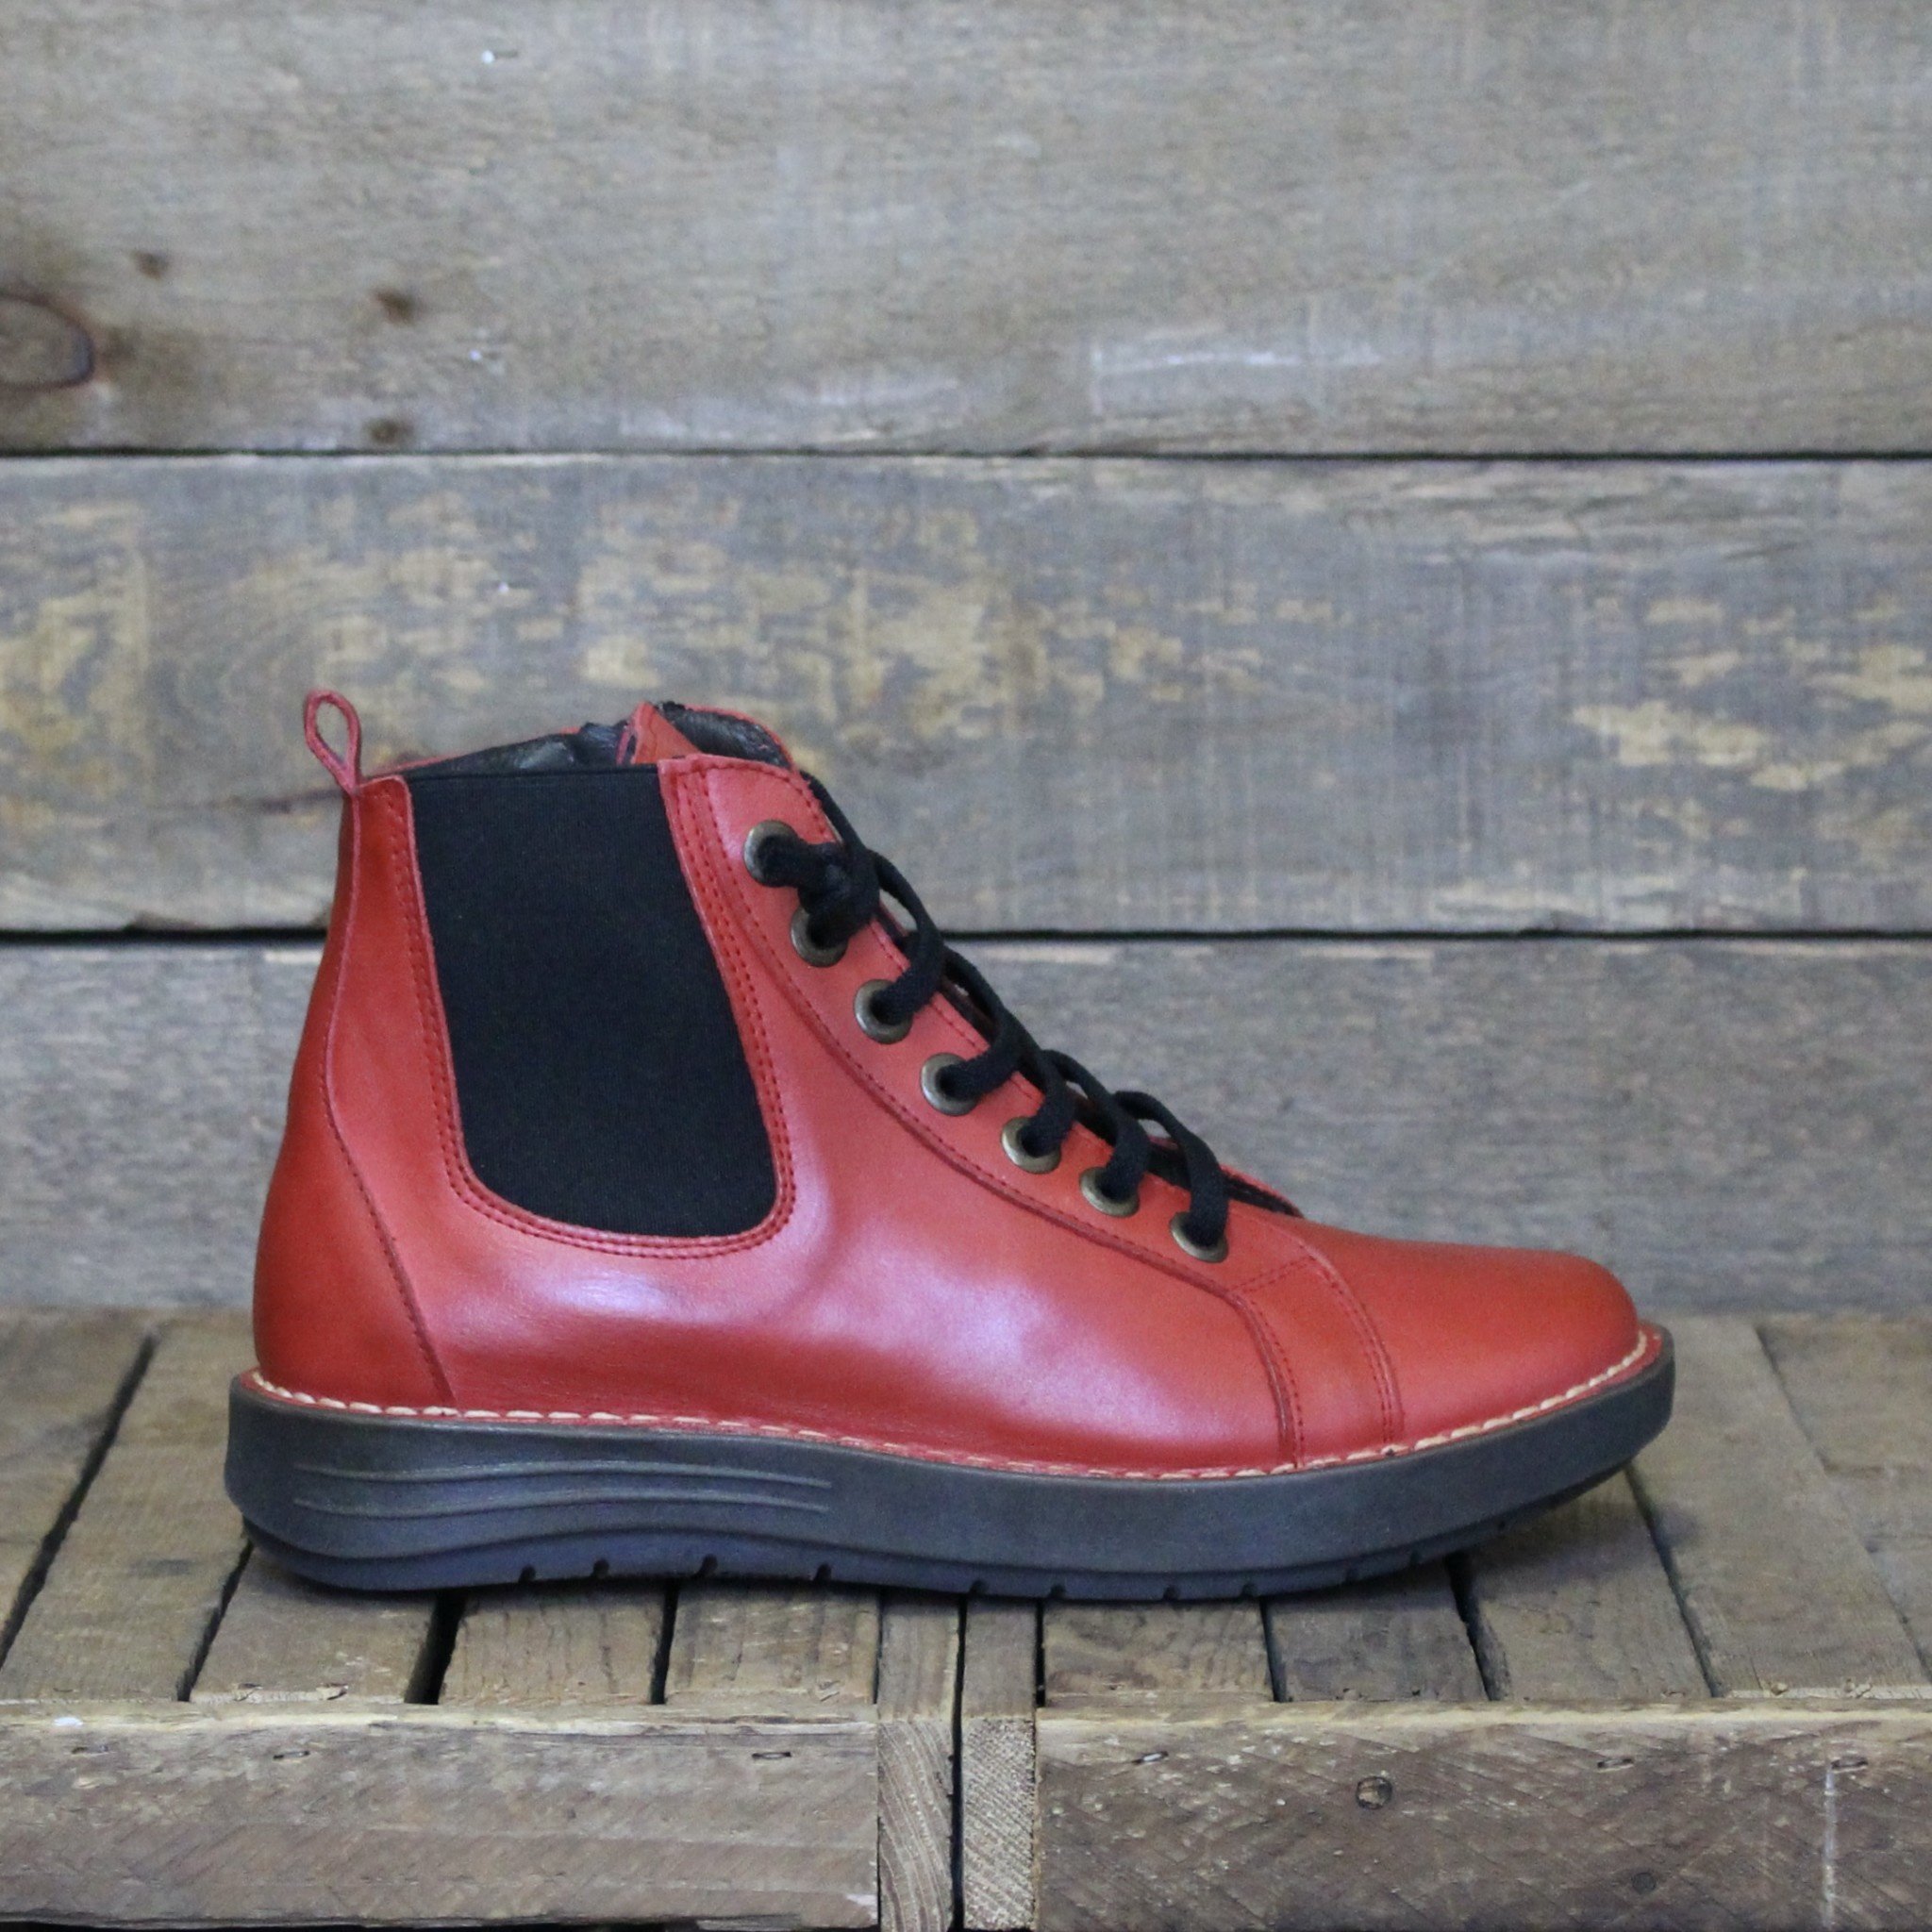 Chacal Chacal - 5622 Madison Leather - Rojo